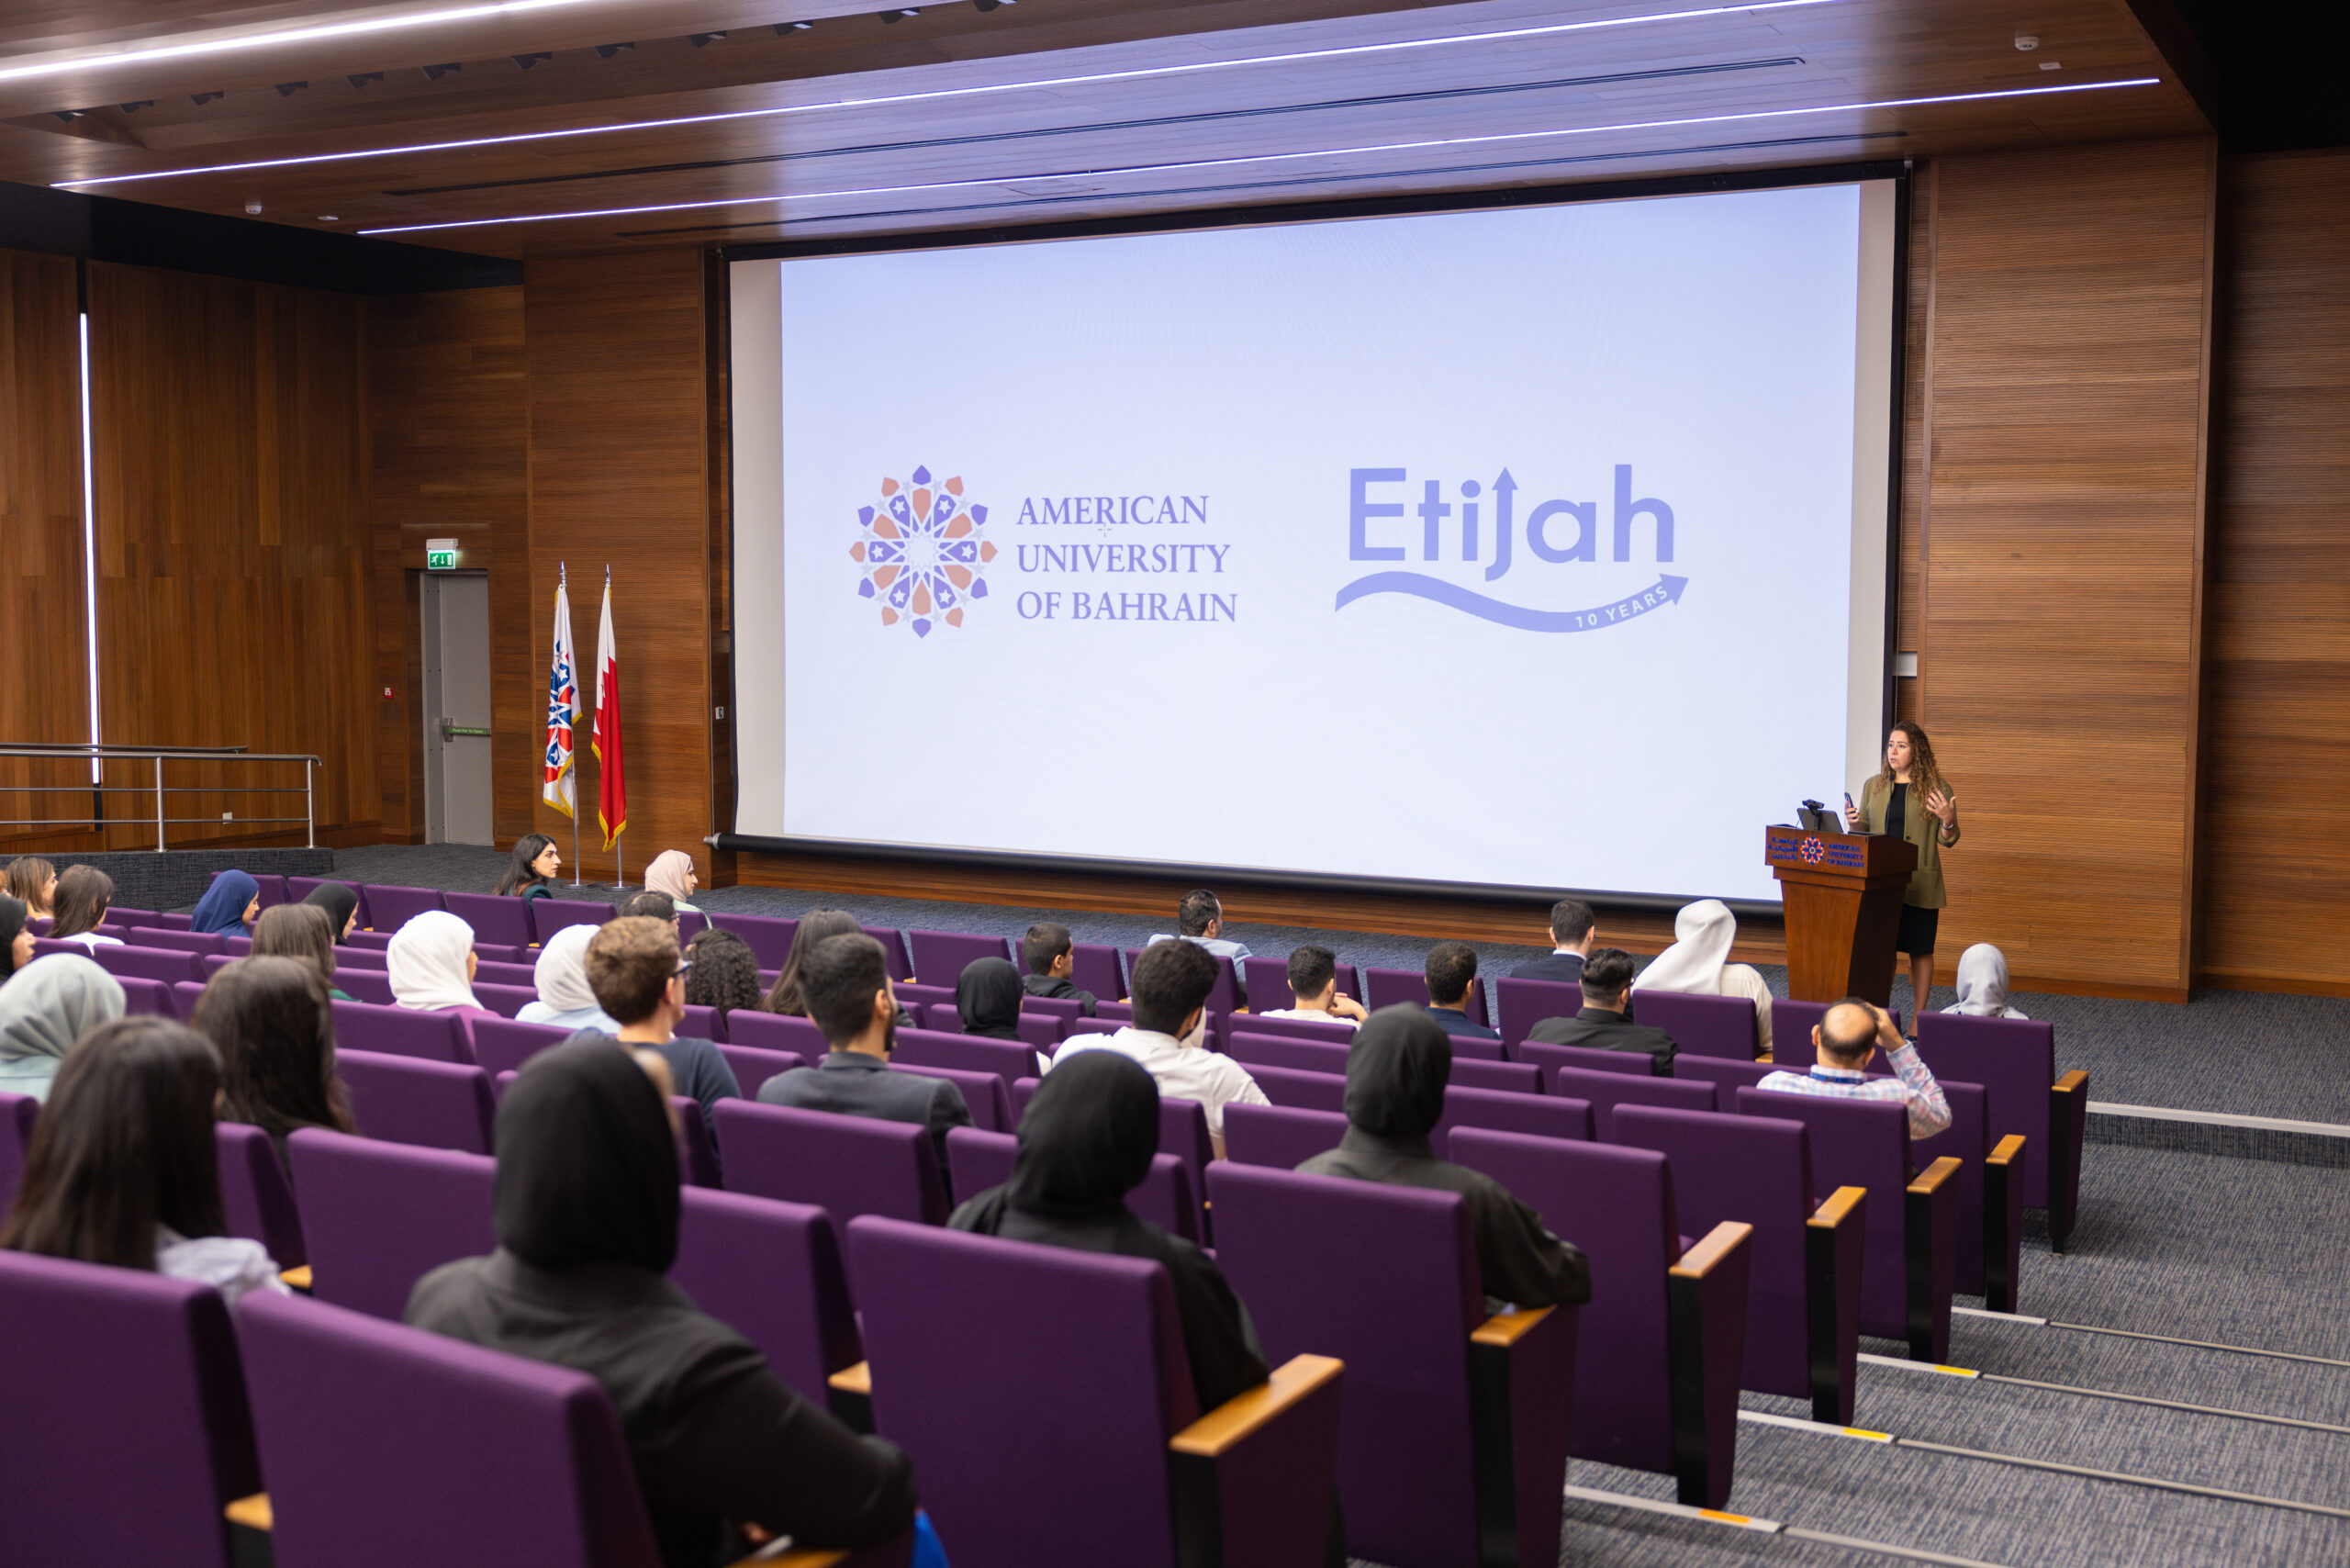 The American University of Bahrain (AUBH) Concludes its Career Fair in Partnership with Etijah Coaching.